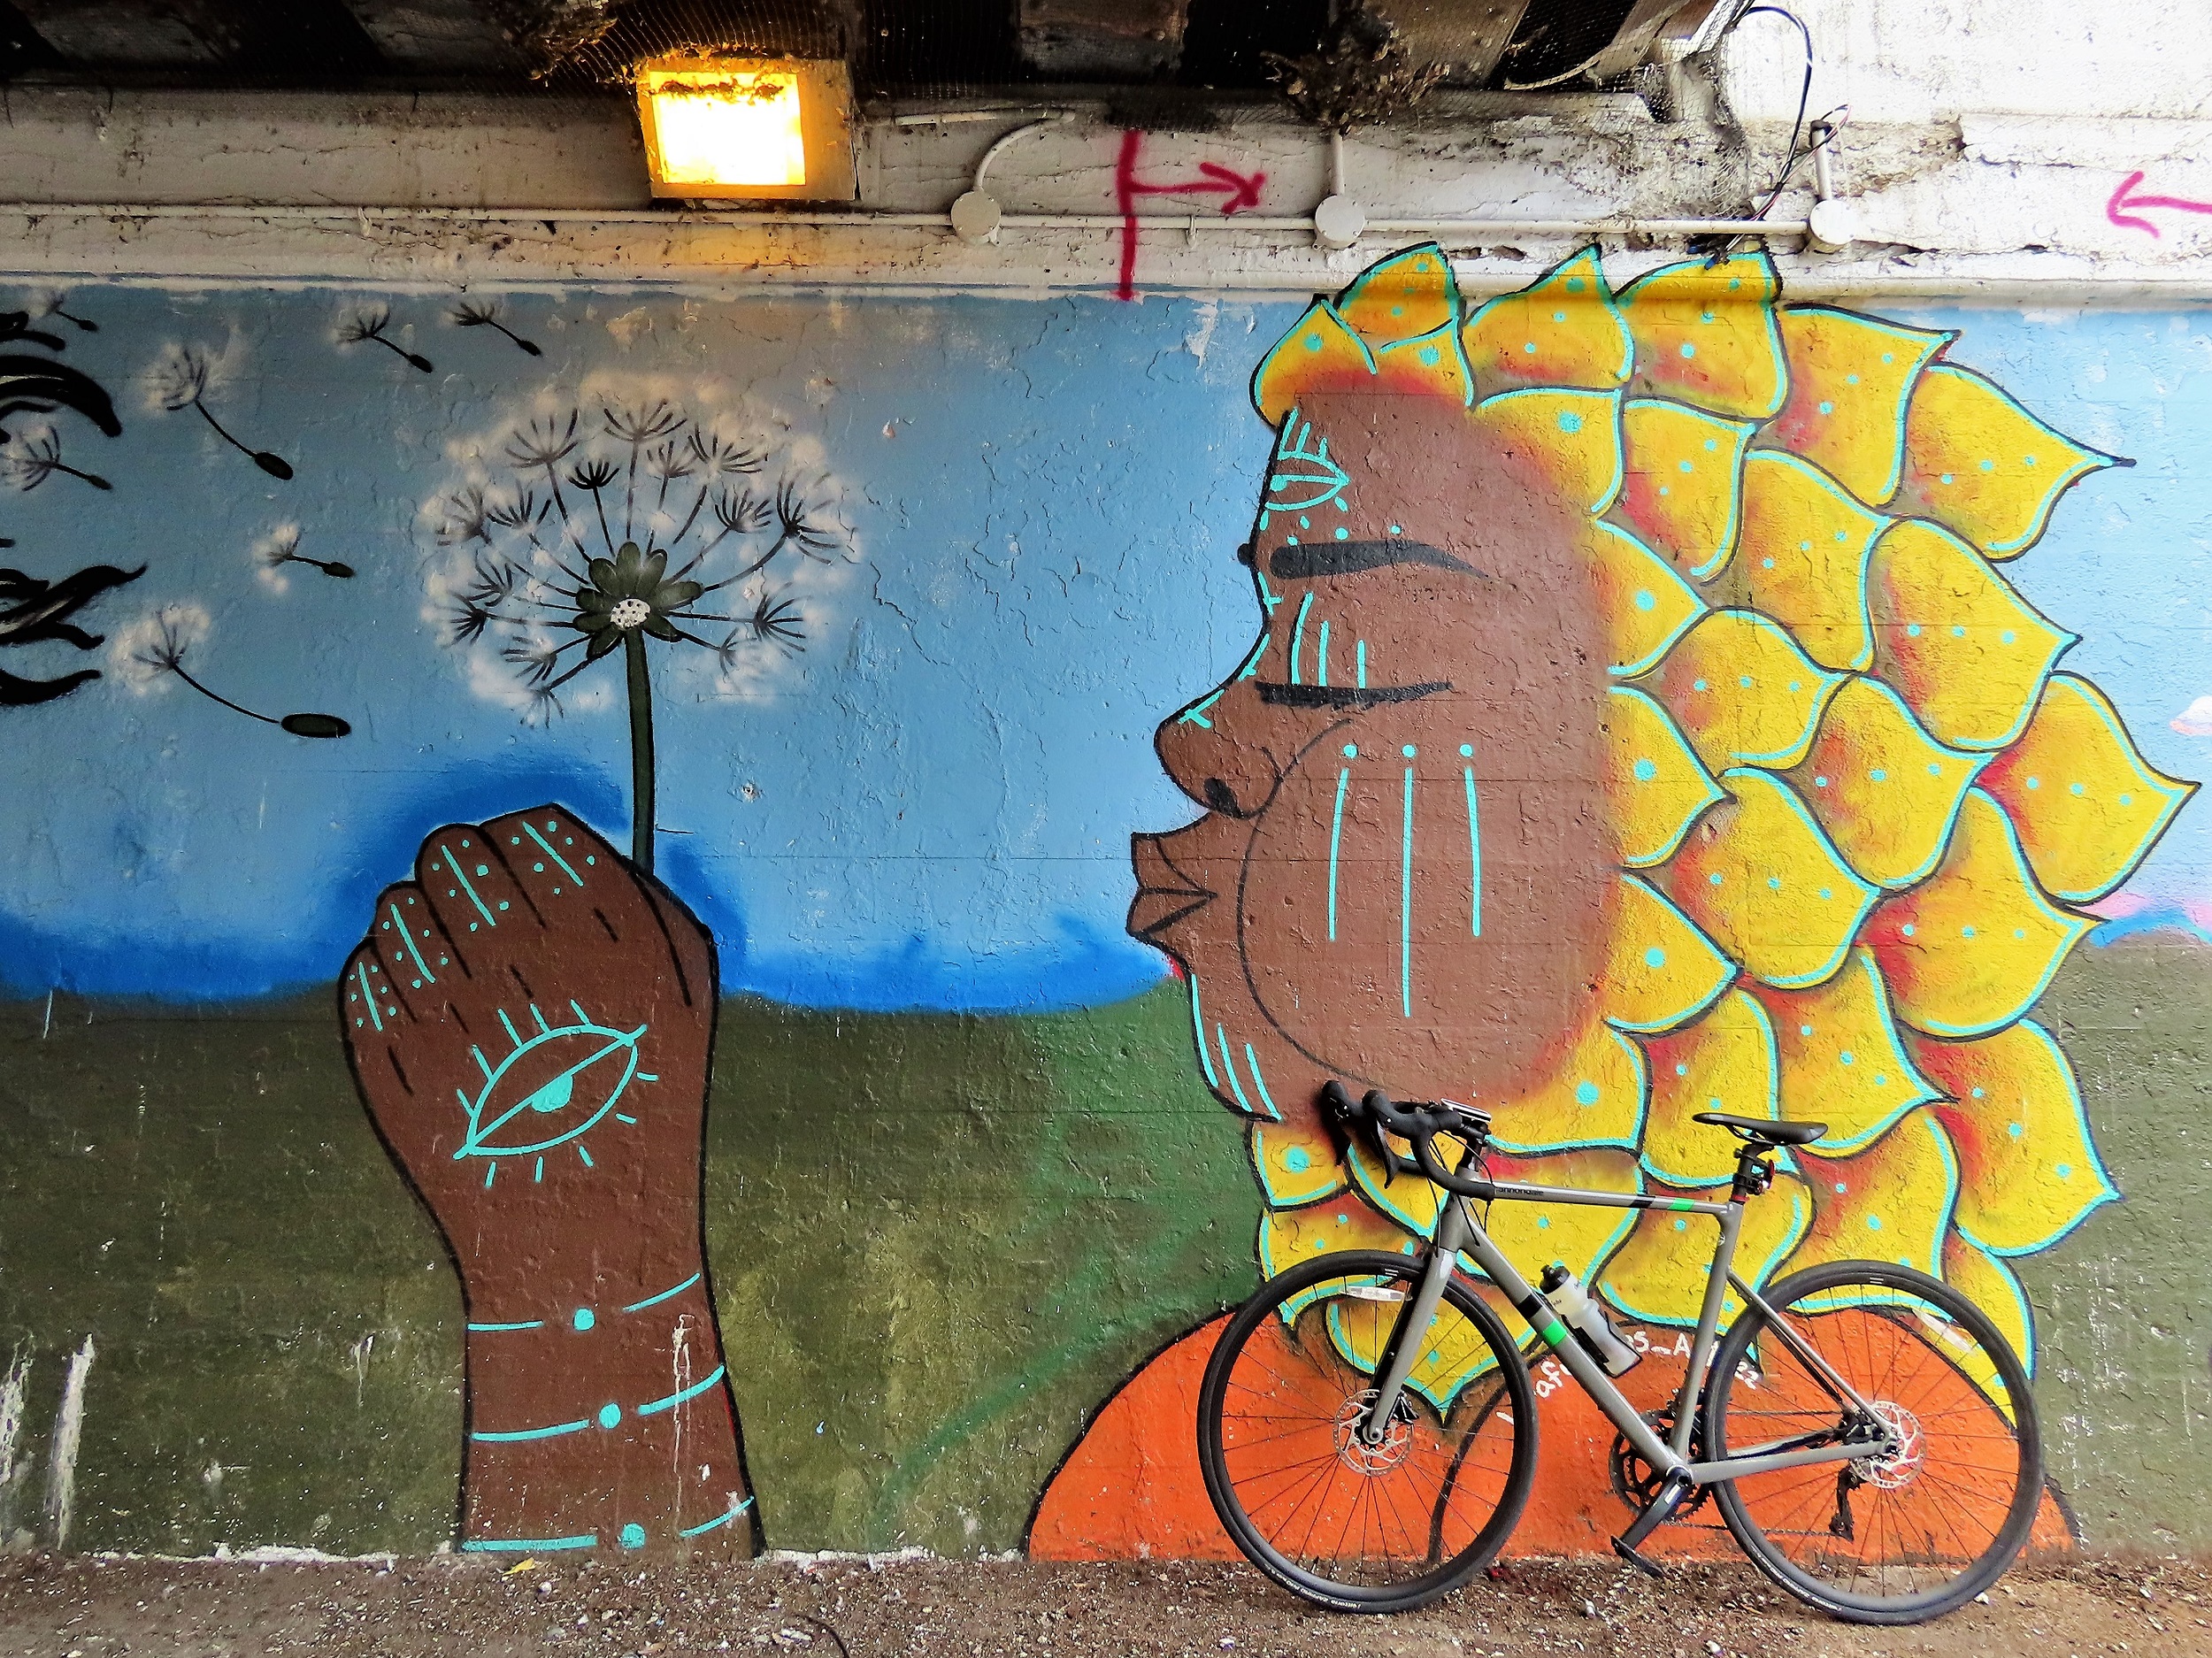 A tour bike leaning at the base of an underpass mural depicting a sunflower-shaped-hair brown skinned girl with her eyes closed mouth set to blow into the dandelion she holds in her hand.